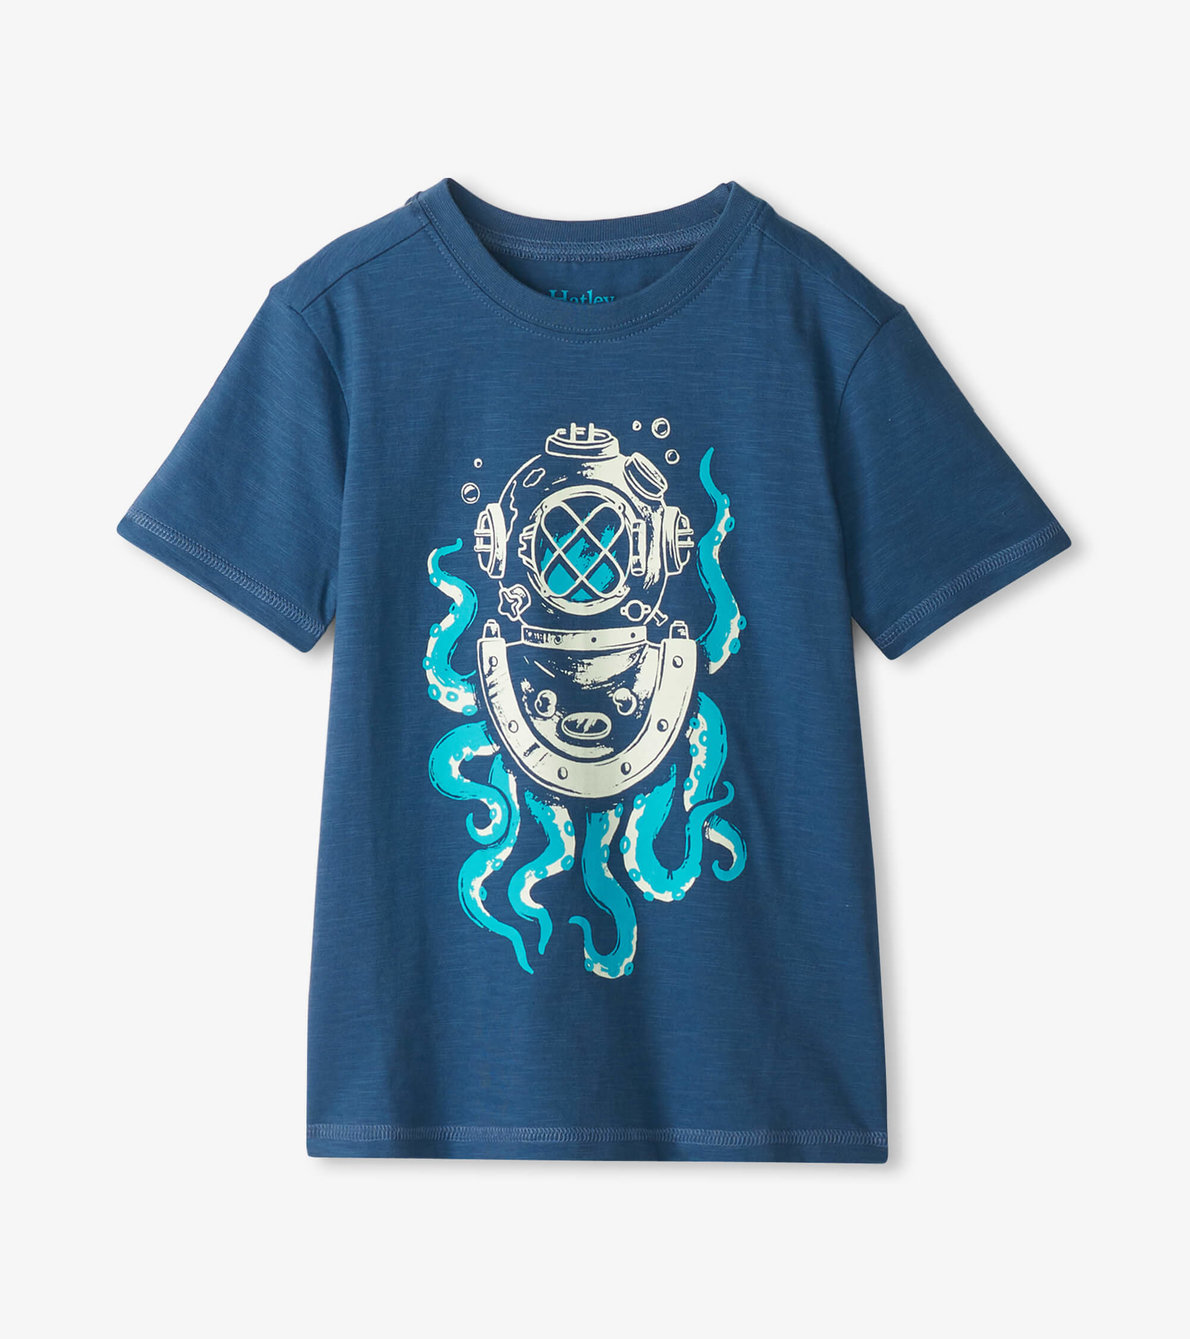 View larger image of Boys Deep Sea Mariner Graphic Tee